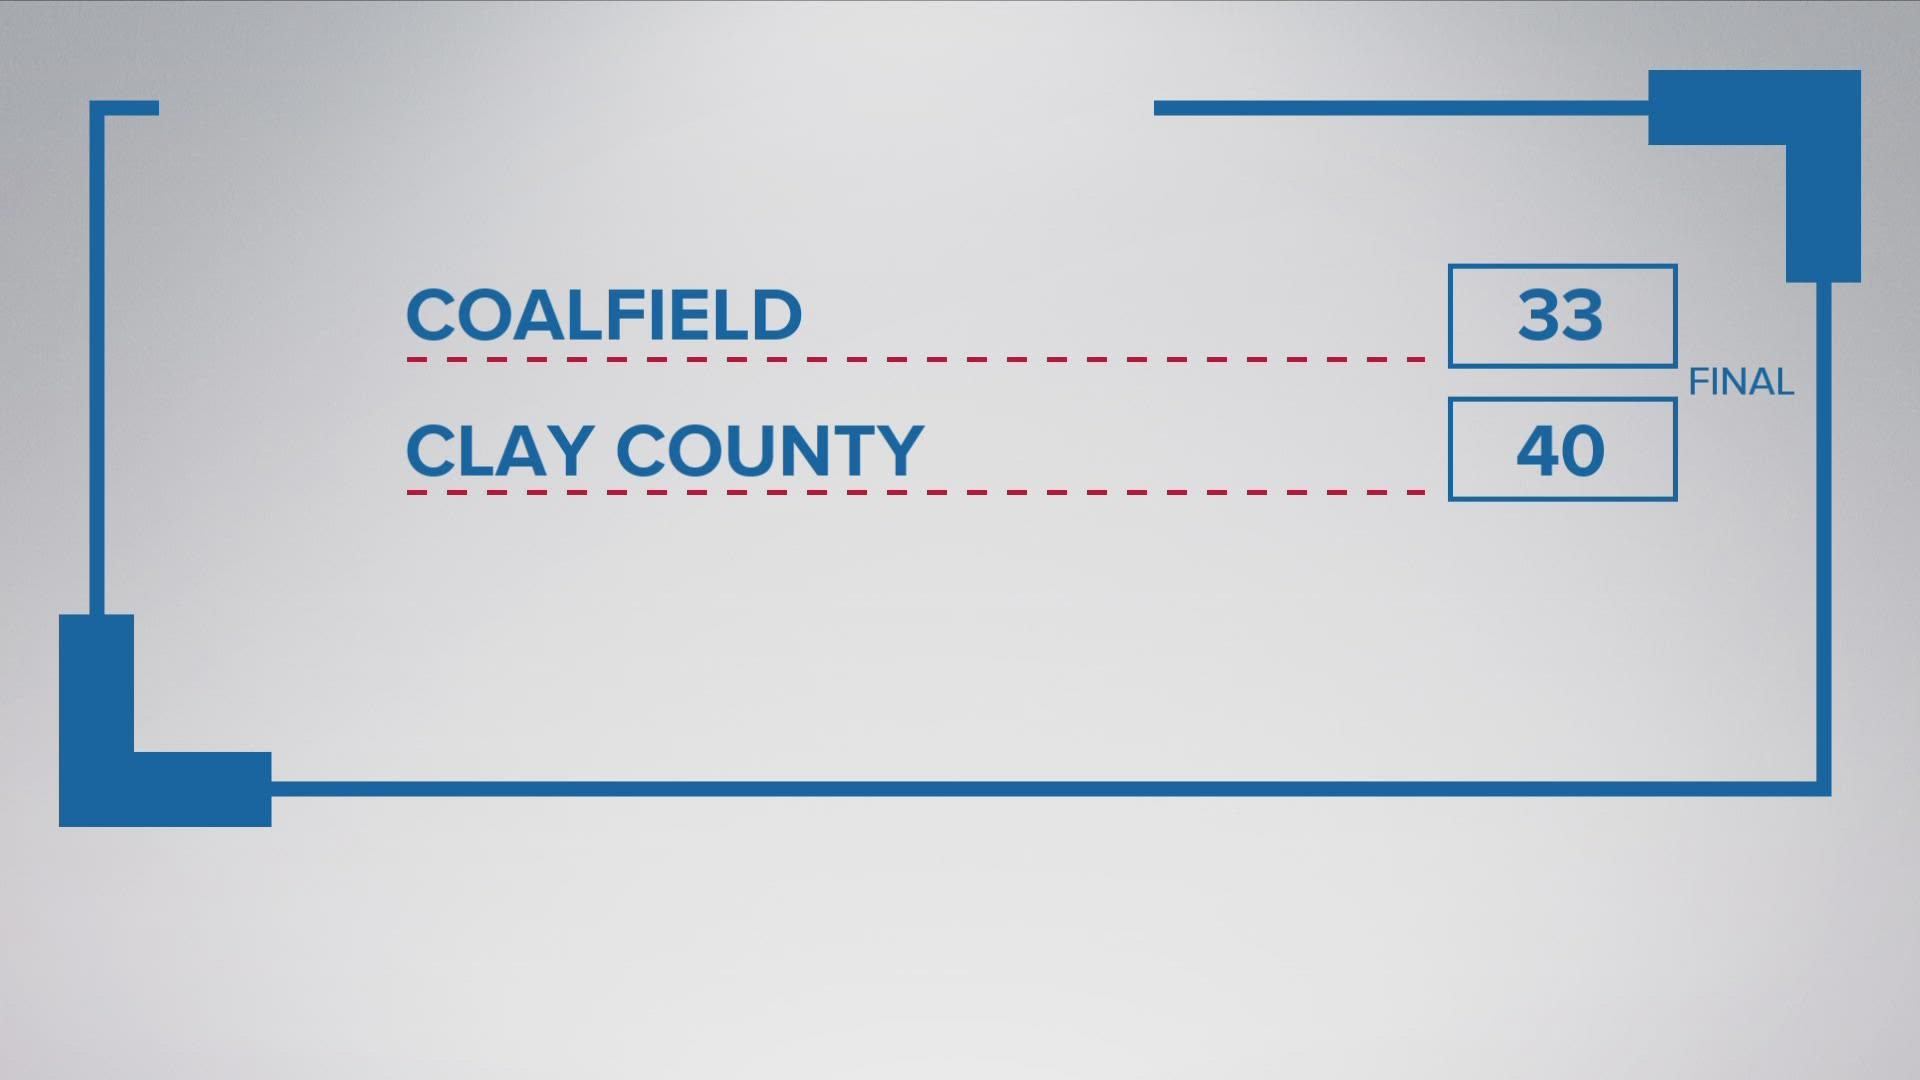 Coalfield was down 40-13 in the second half, and the comeback comes up short. They'd lost 40-33.